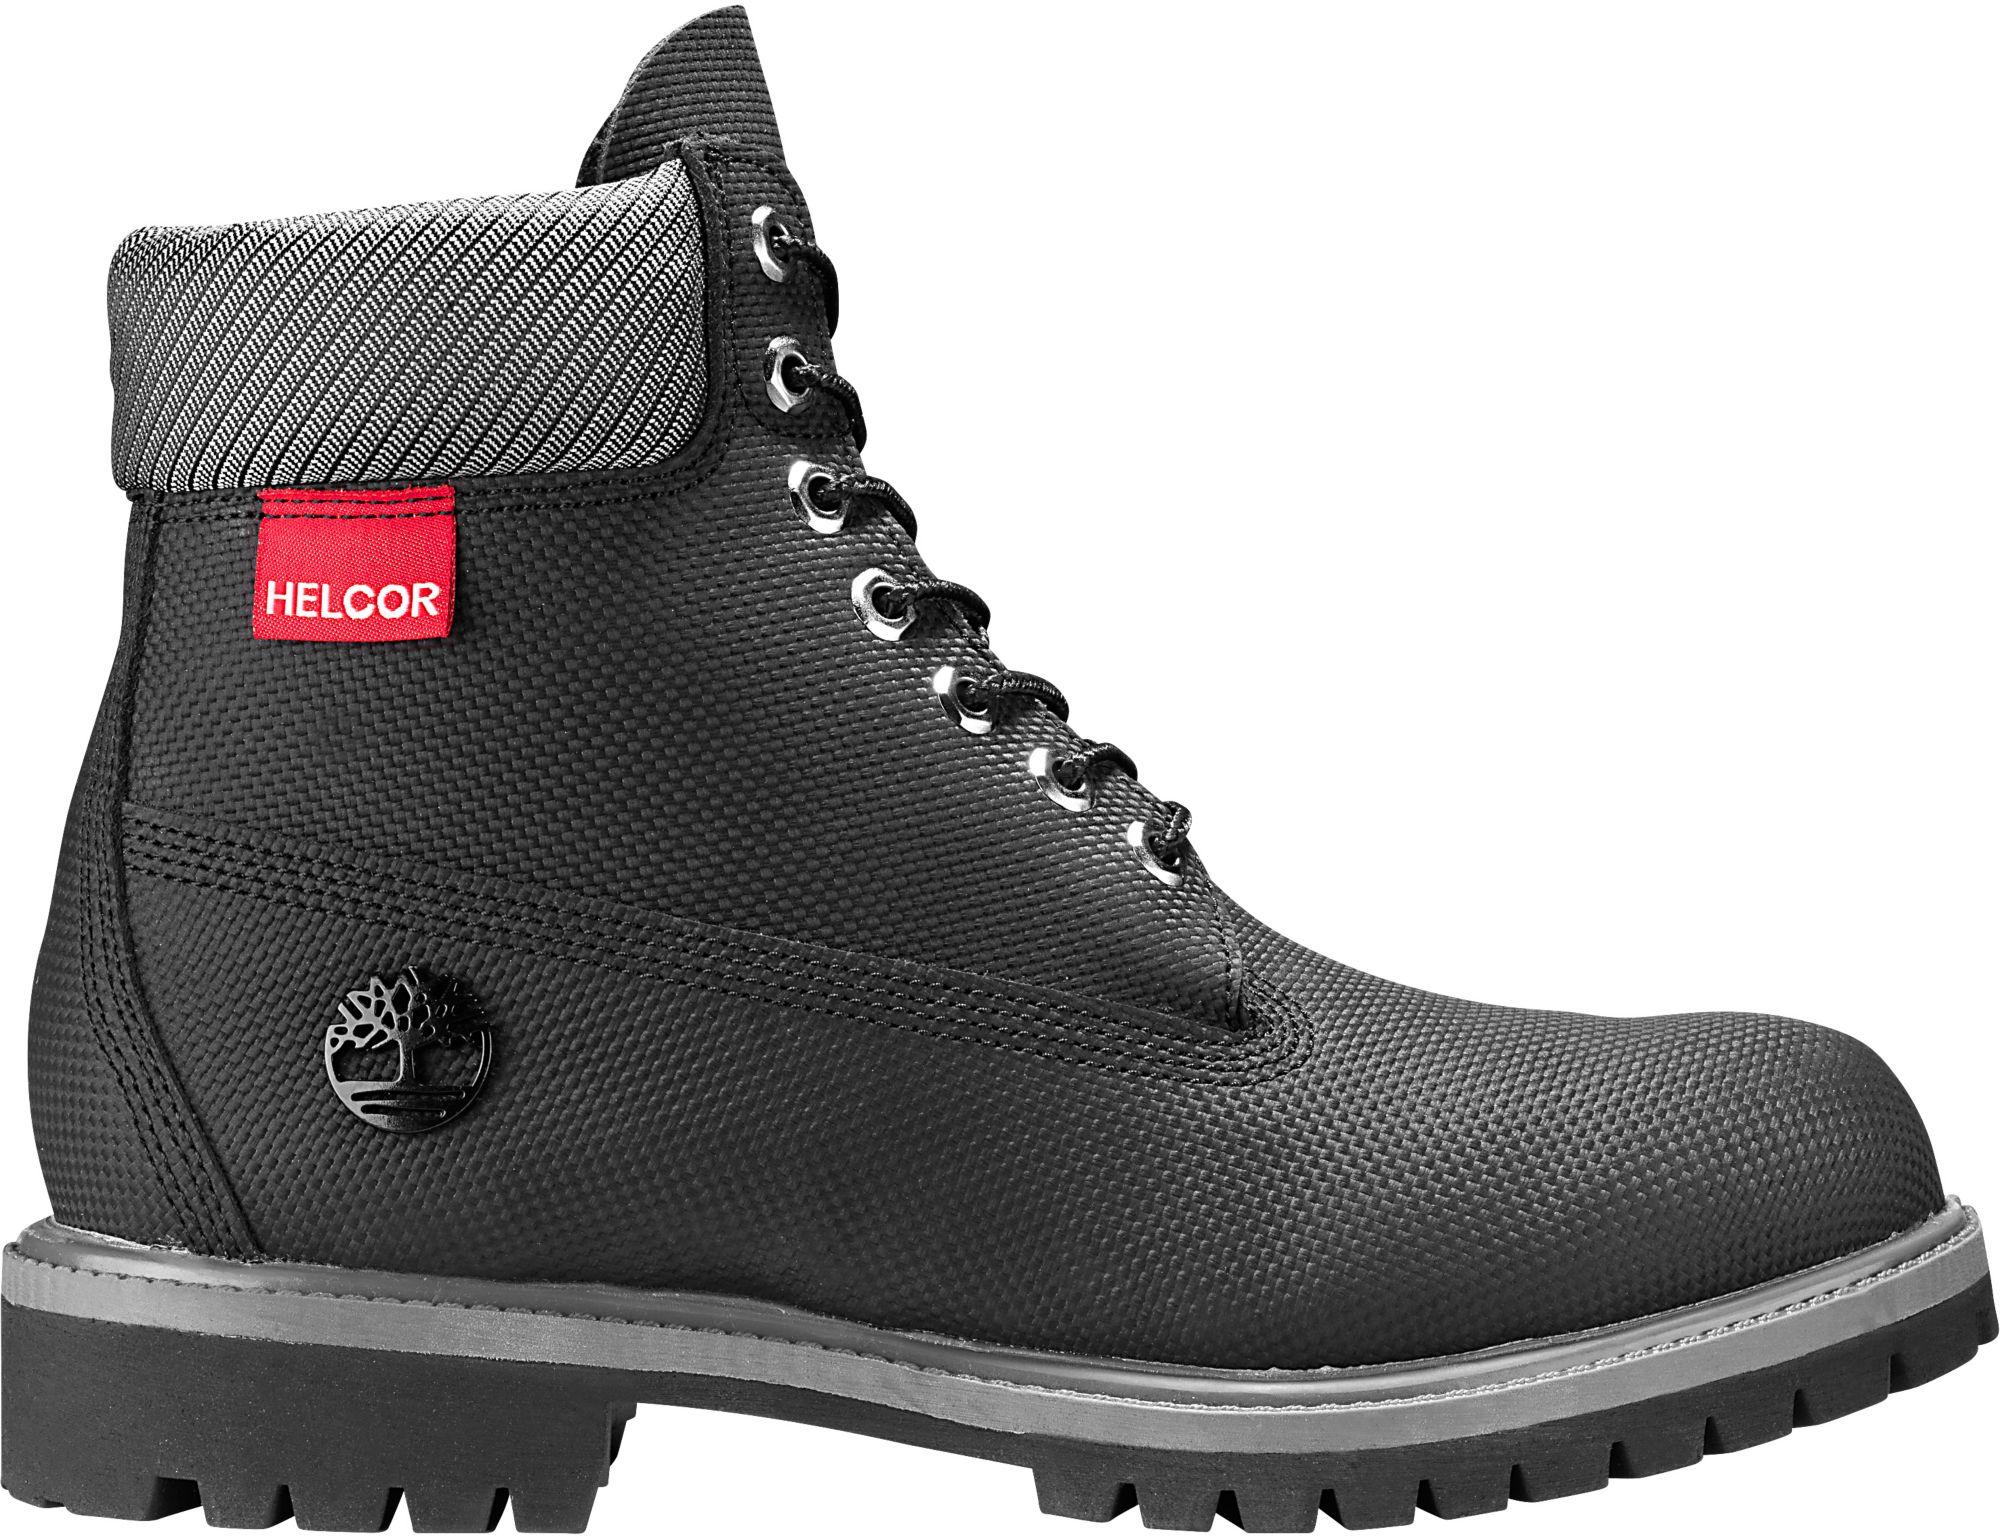 Timberland 6'' Helcor Leather 400g Waterproof Winter Boots in Black for Men  - Lyst